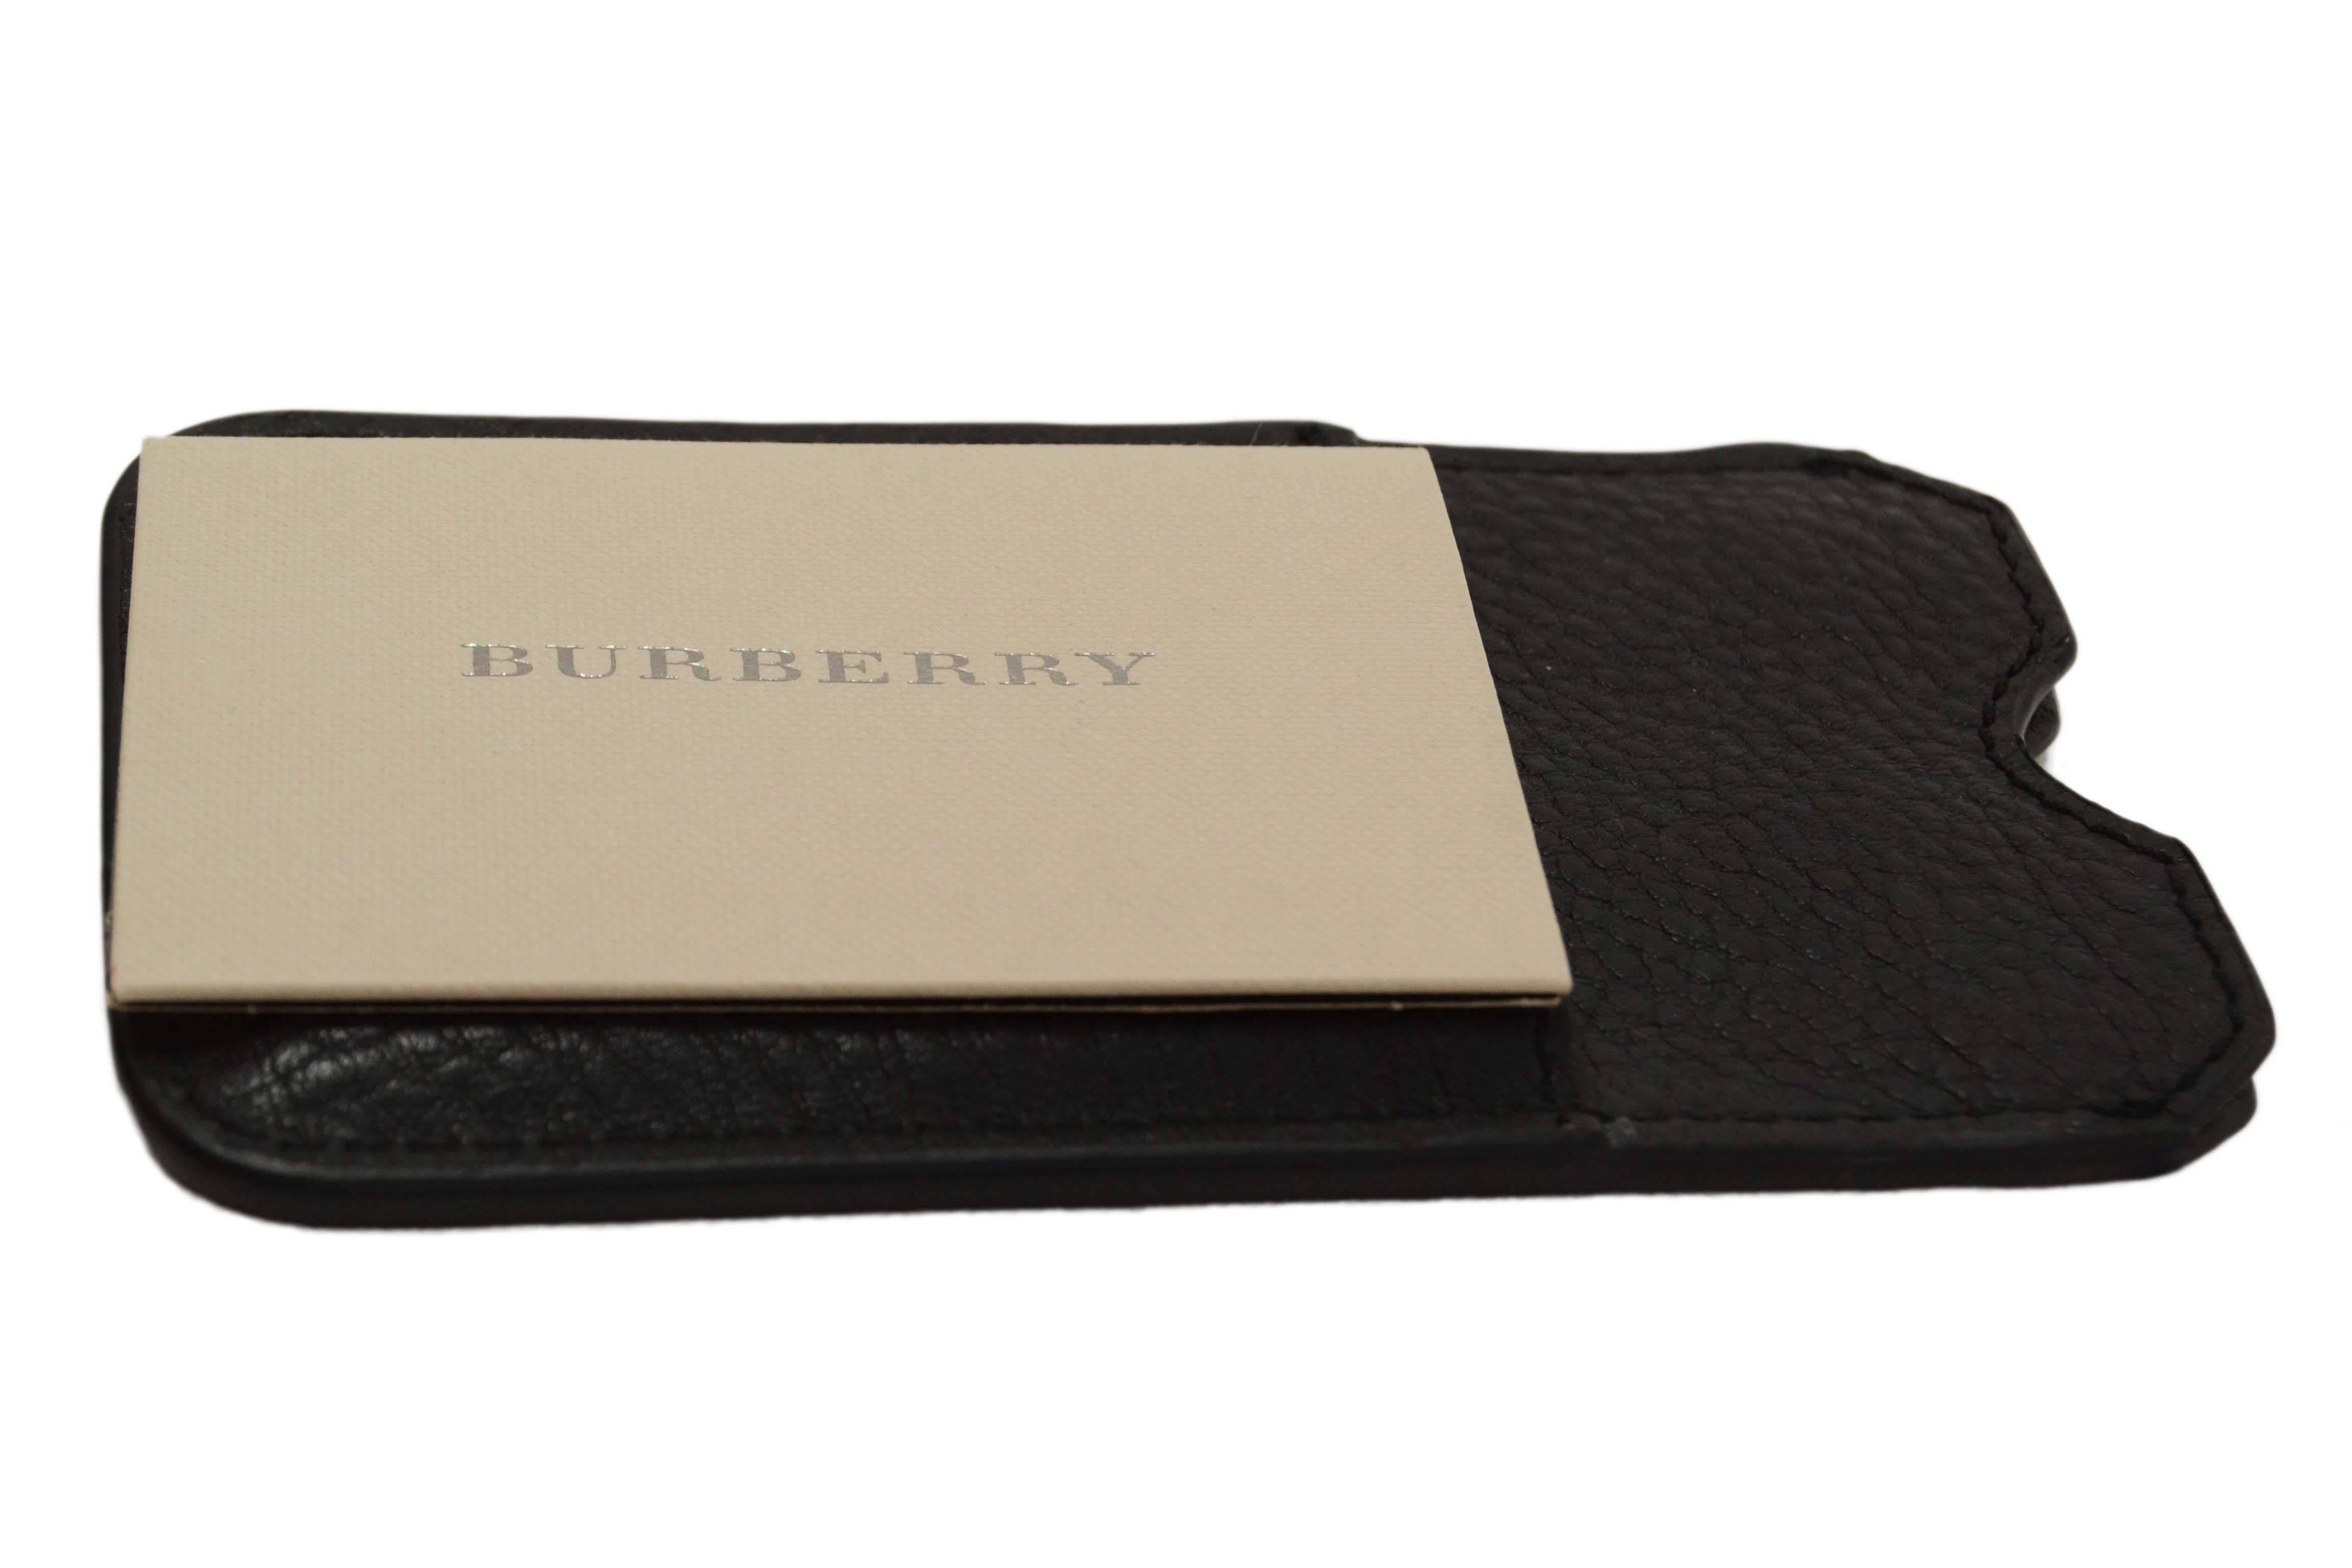 Burberry Black Leather Studded Cellphone Case 1